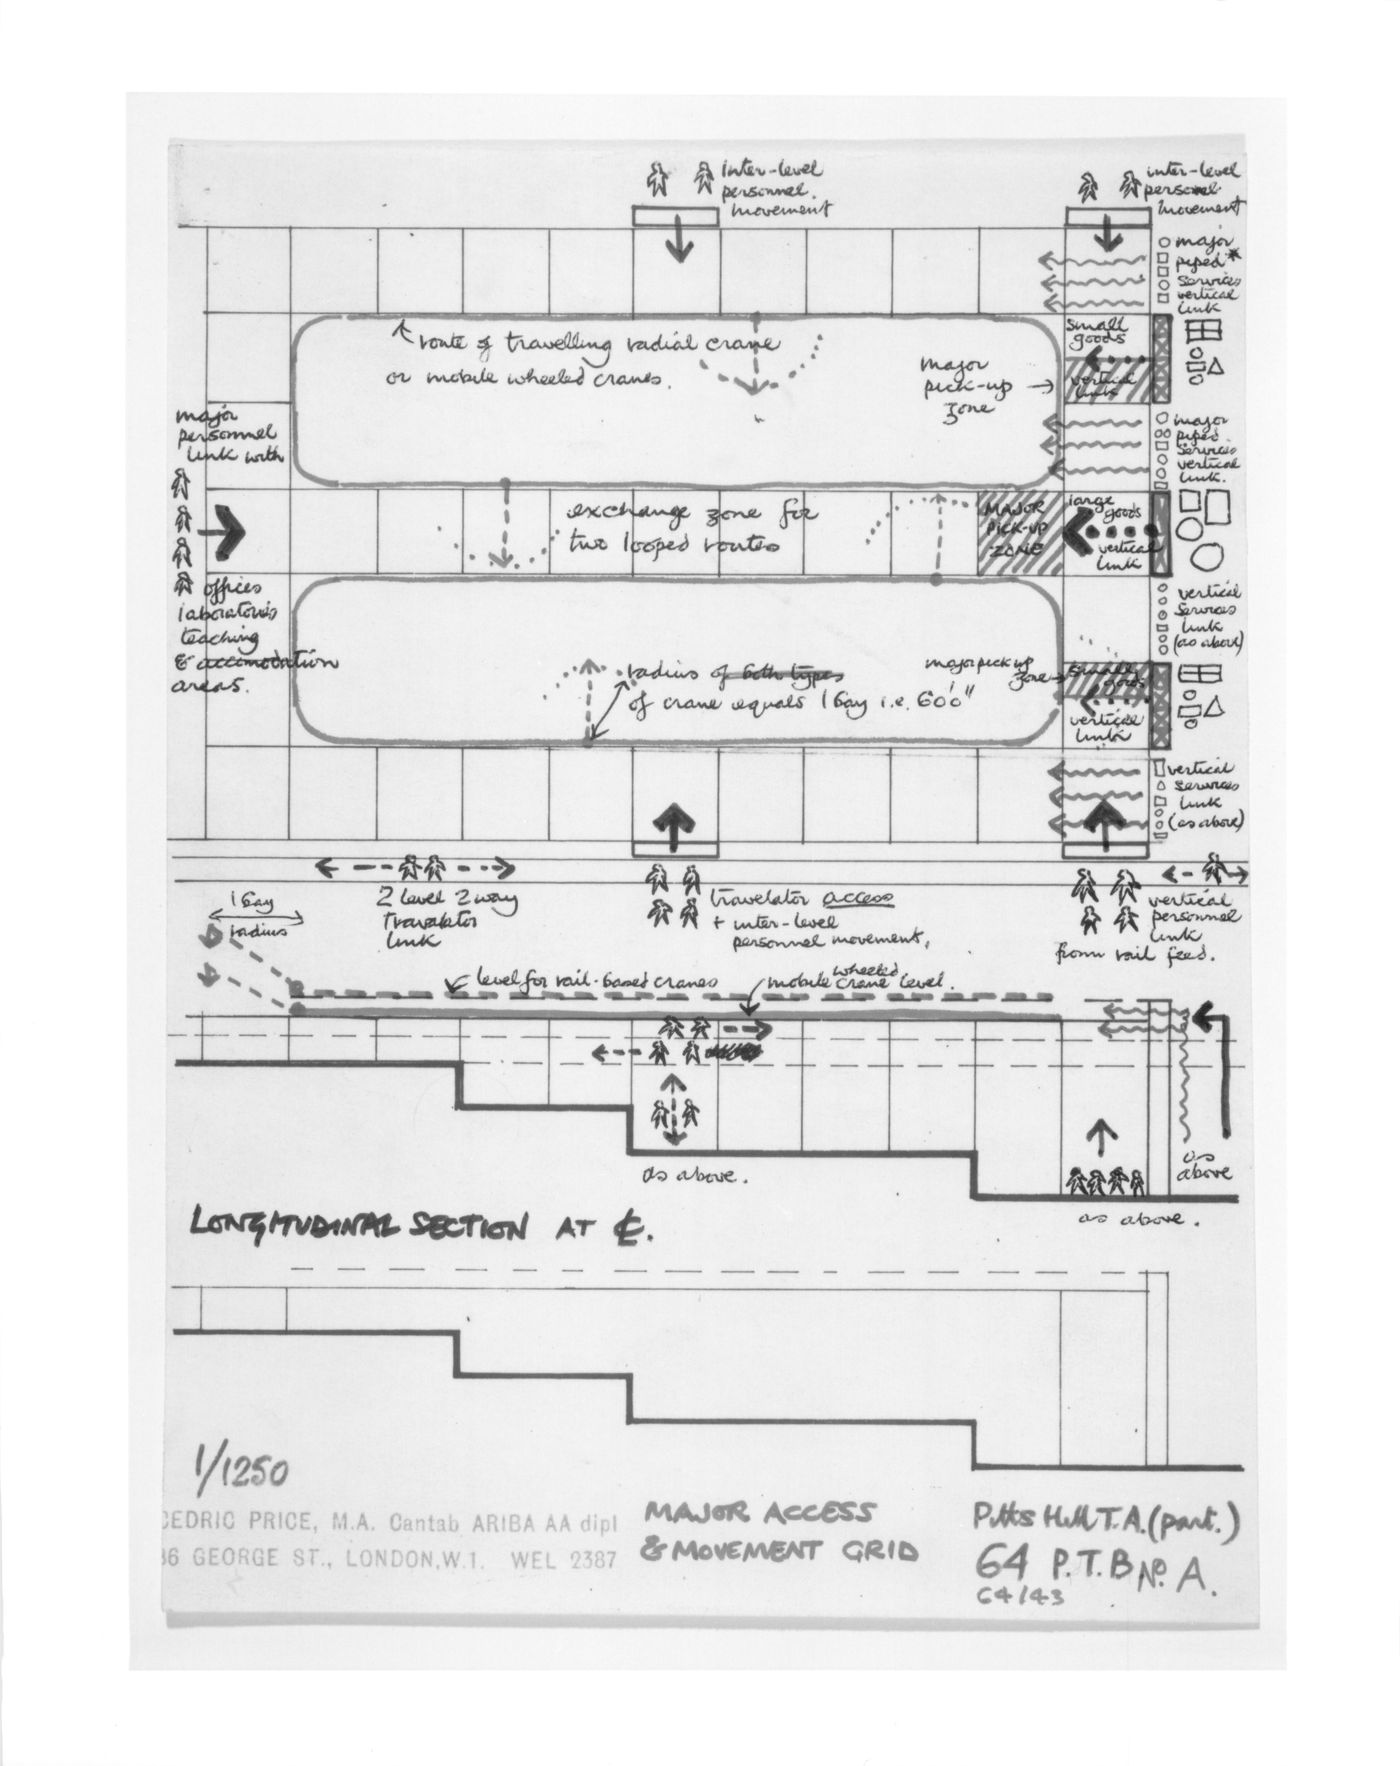 Diagrammatic plan and section of Pitts Hill Transfer Area, Potteries Thinkbelt